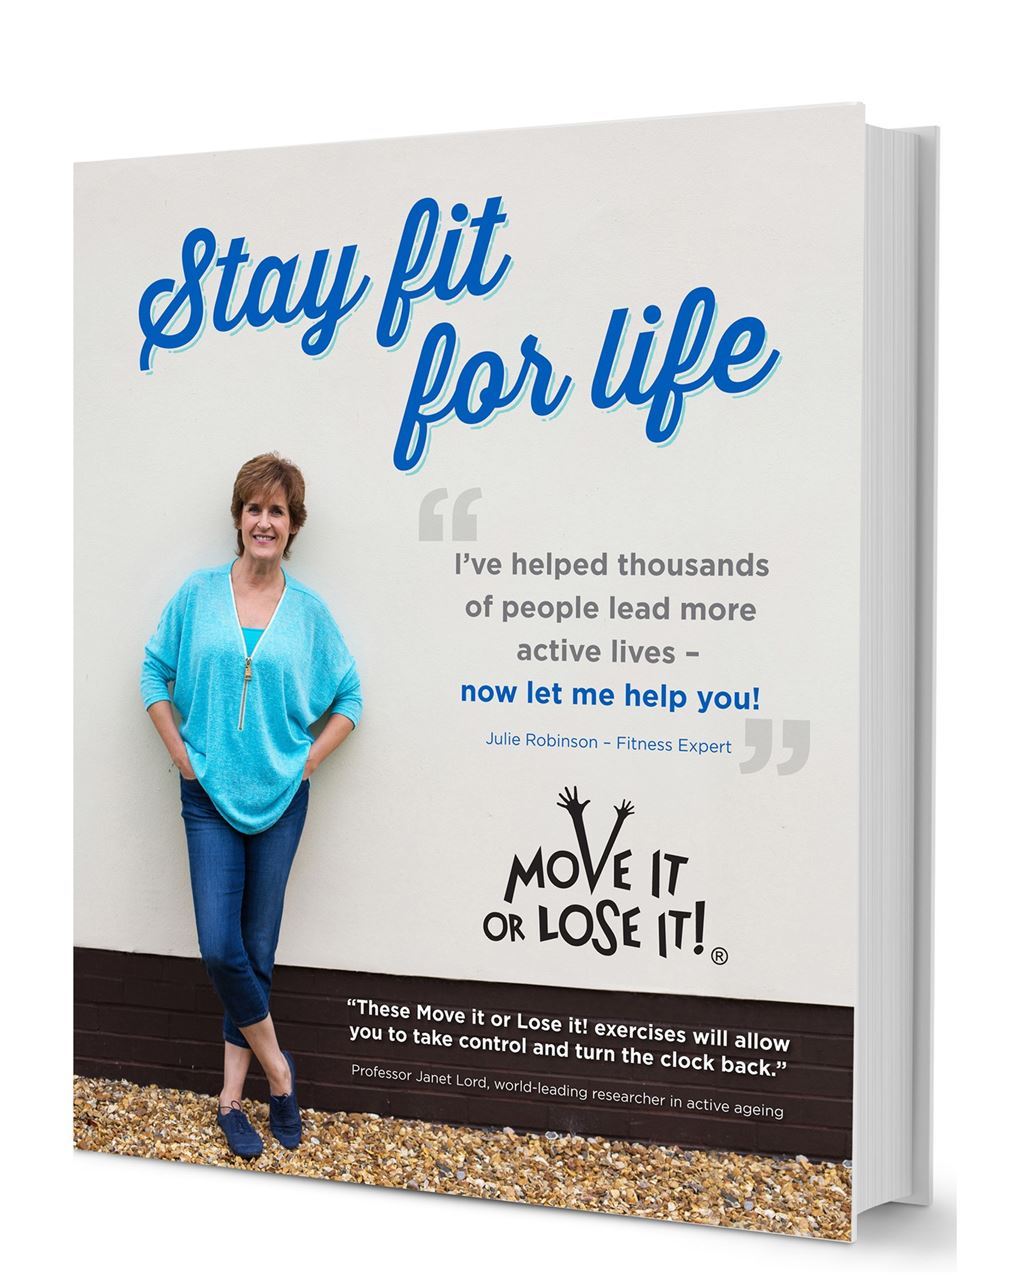 Stay Fit For Life by Julie Robinson